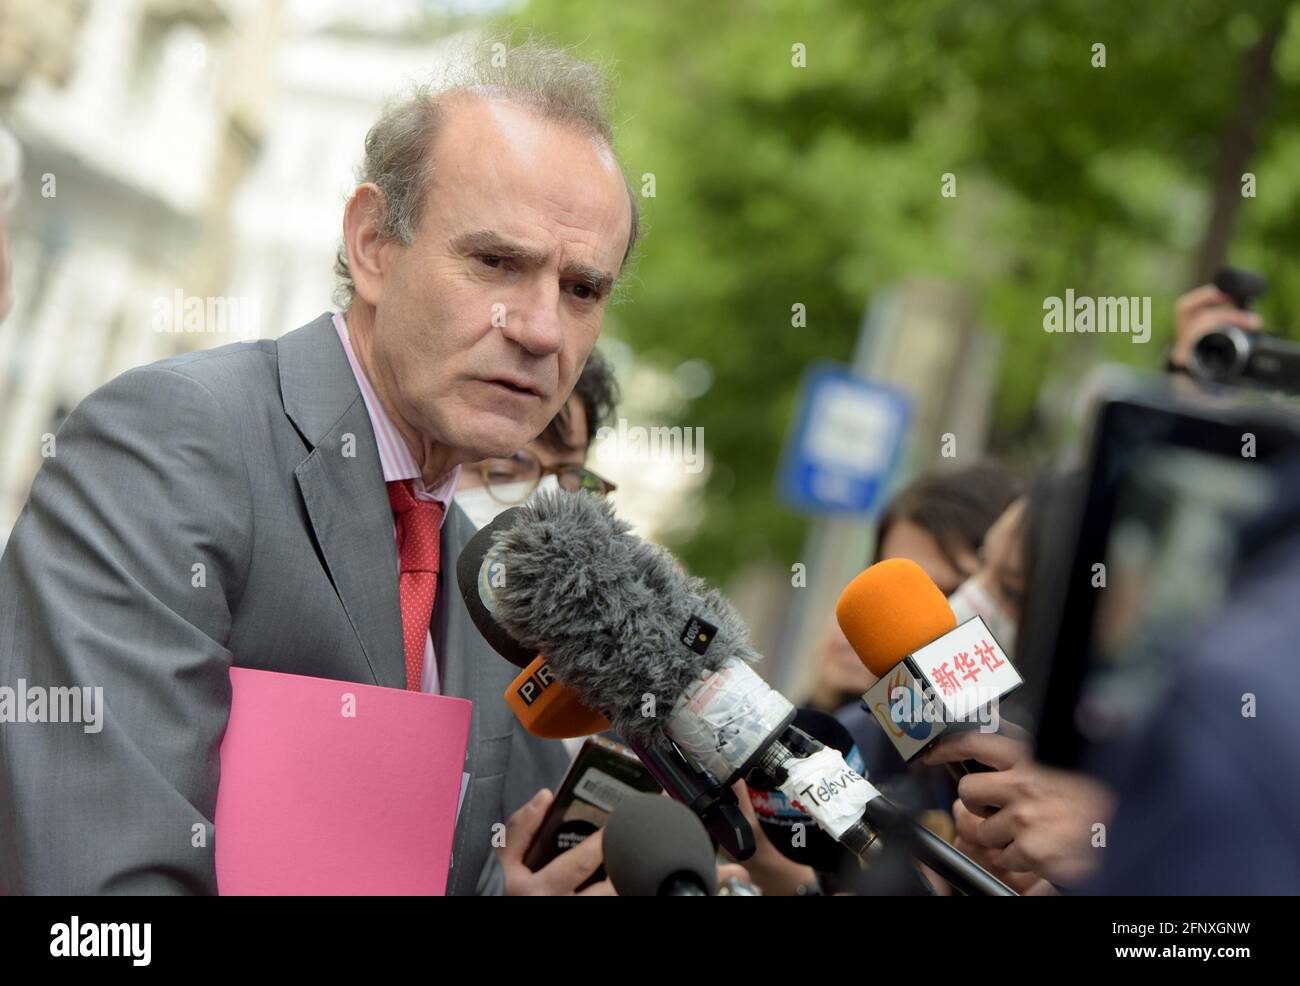 Vienna, Austria. 19th May, 2021. Enrique Mora, the deputy secretary-general and political director of the European External Action Service, is interviewed by journalists after a meeting of the Joint Commission on the Joint Comprehensive Plan of Action (JCPOA) in Vienna, Austria, on May 19, 2021. Credit: Guo Chen/Xinhua/Alamy Live News Stock Photo